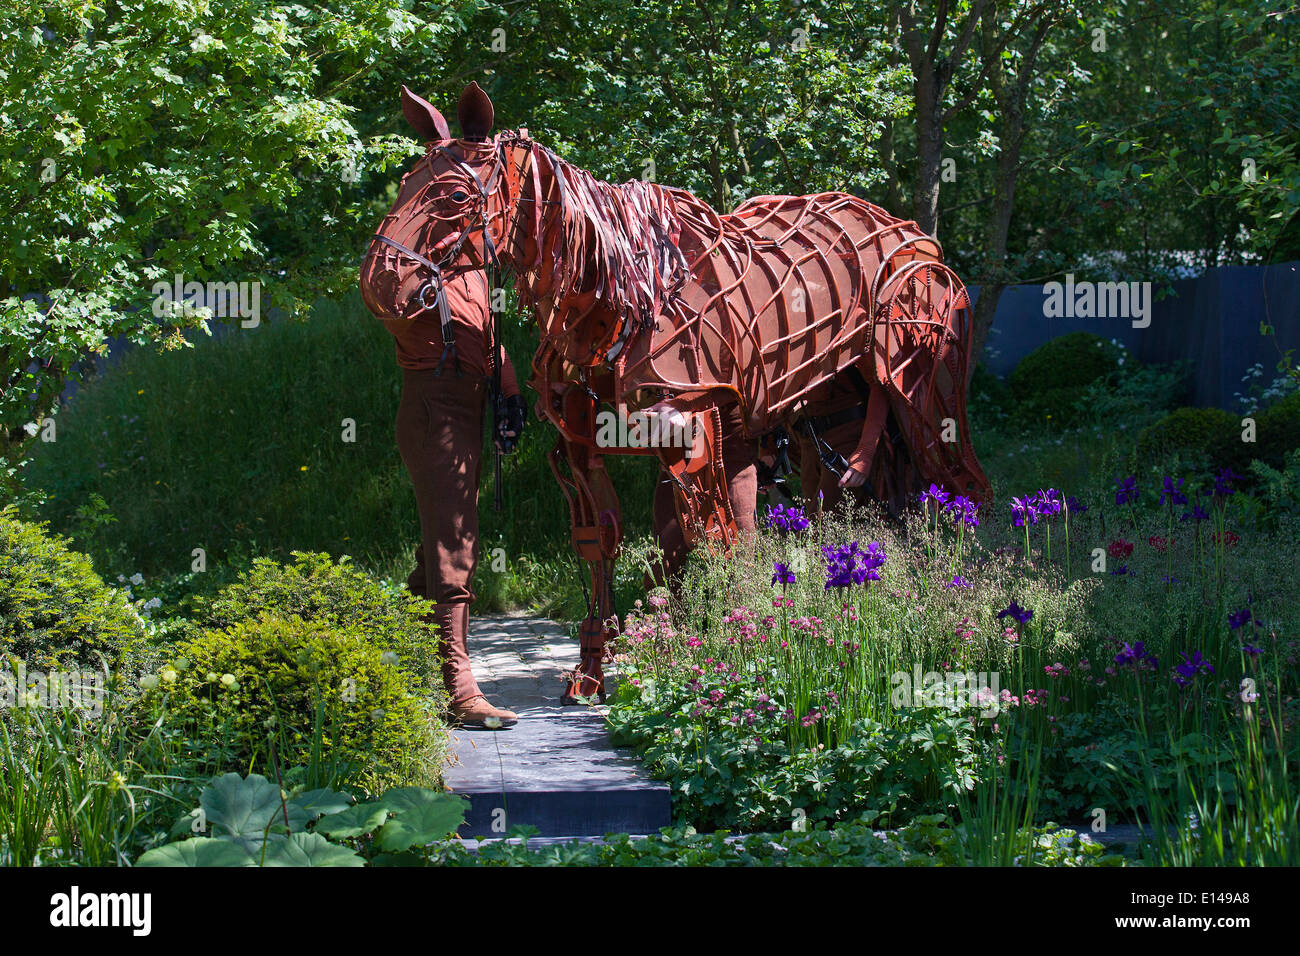 'Joey' the puppet from 'War Horse' stands in 'No Man's Land', a World War 1 Commemorative Garden at Chelsea Flower Show 19.05.14 Stock Photo